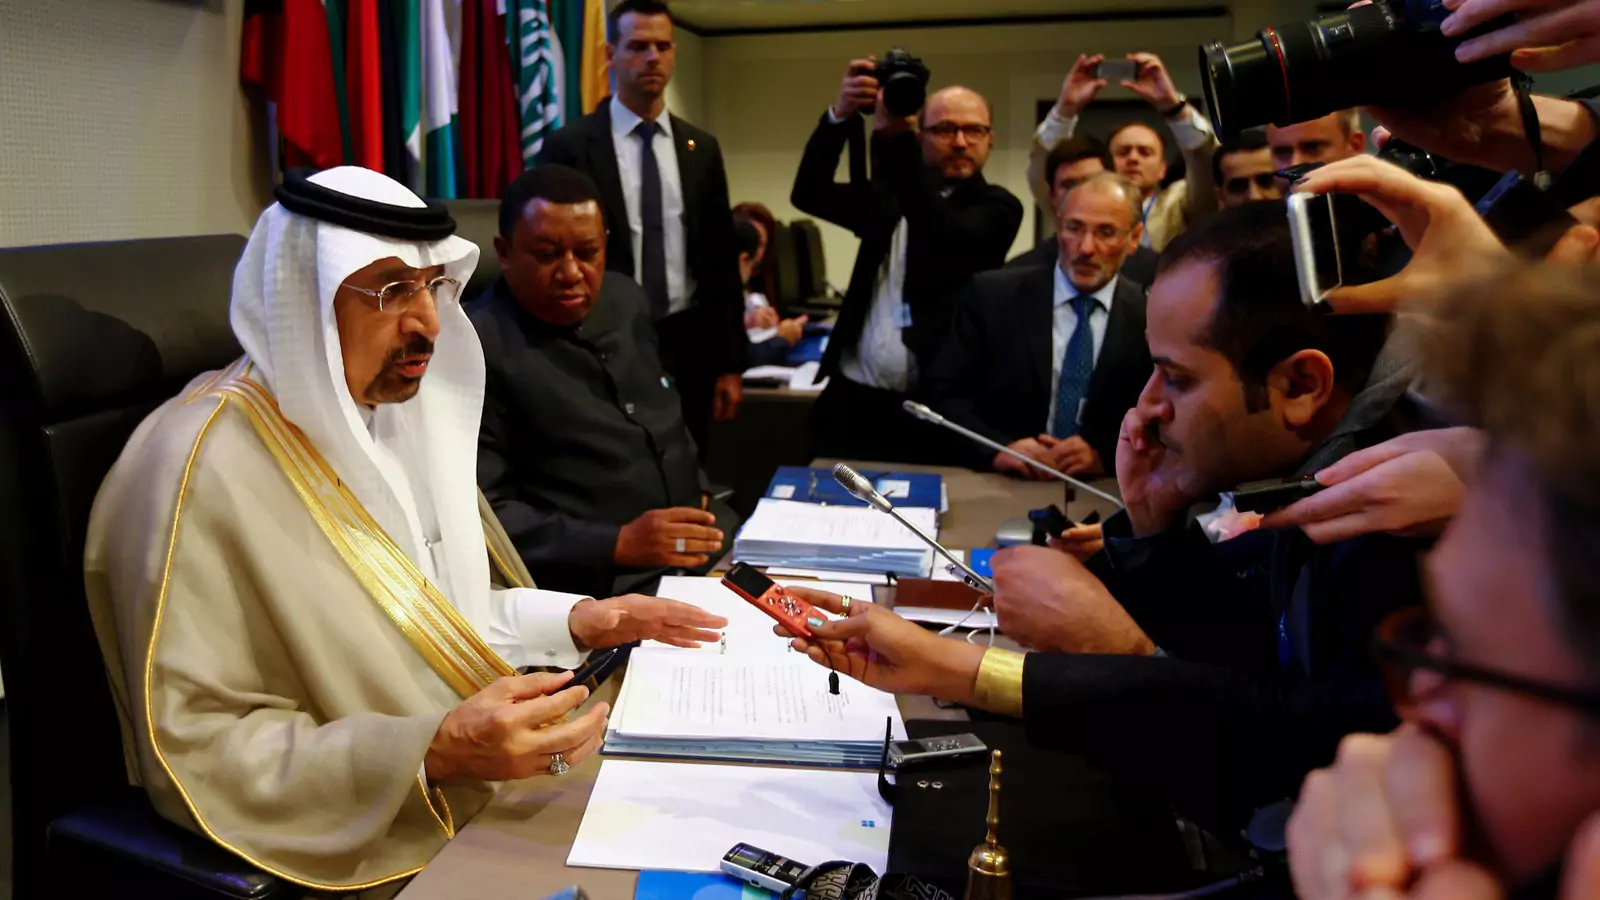 Saudi Arabia's Energy Minister Khalid al-Falih said said last week that oil prices could easily have reached over $100 a barrel, but for Saudi efforts.